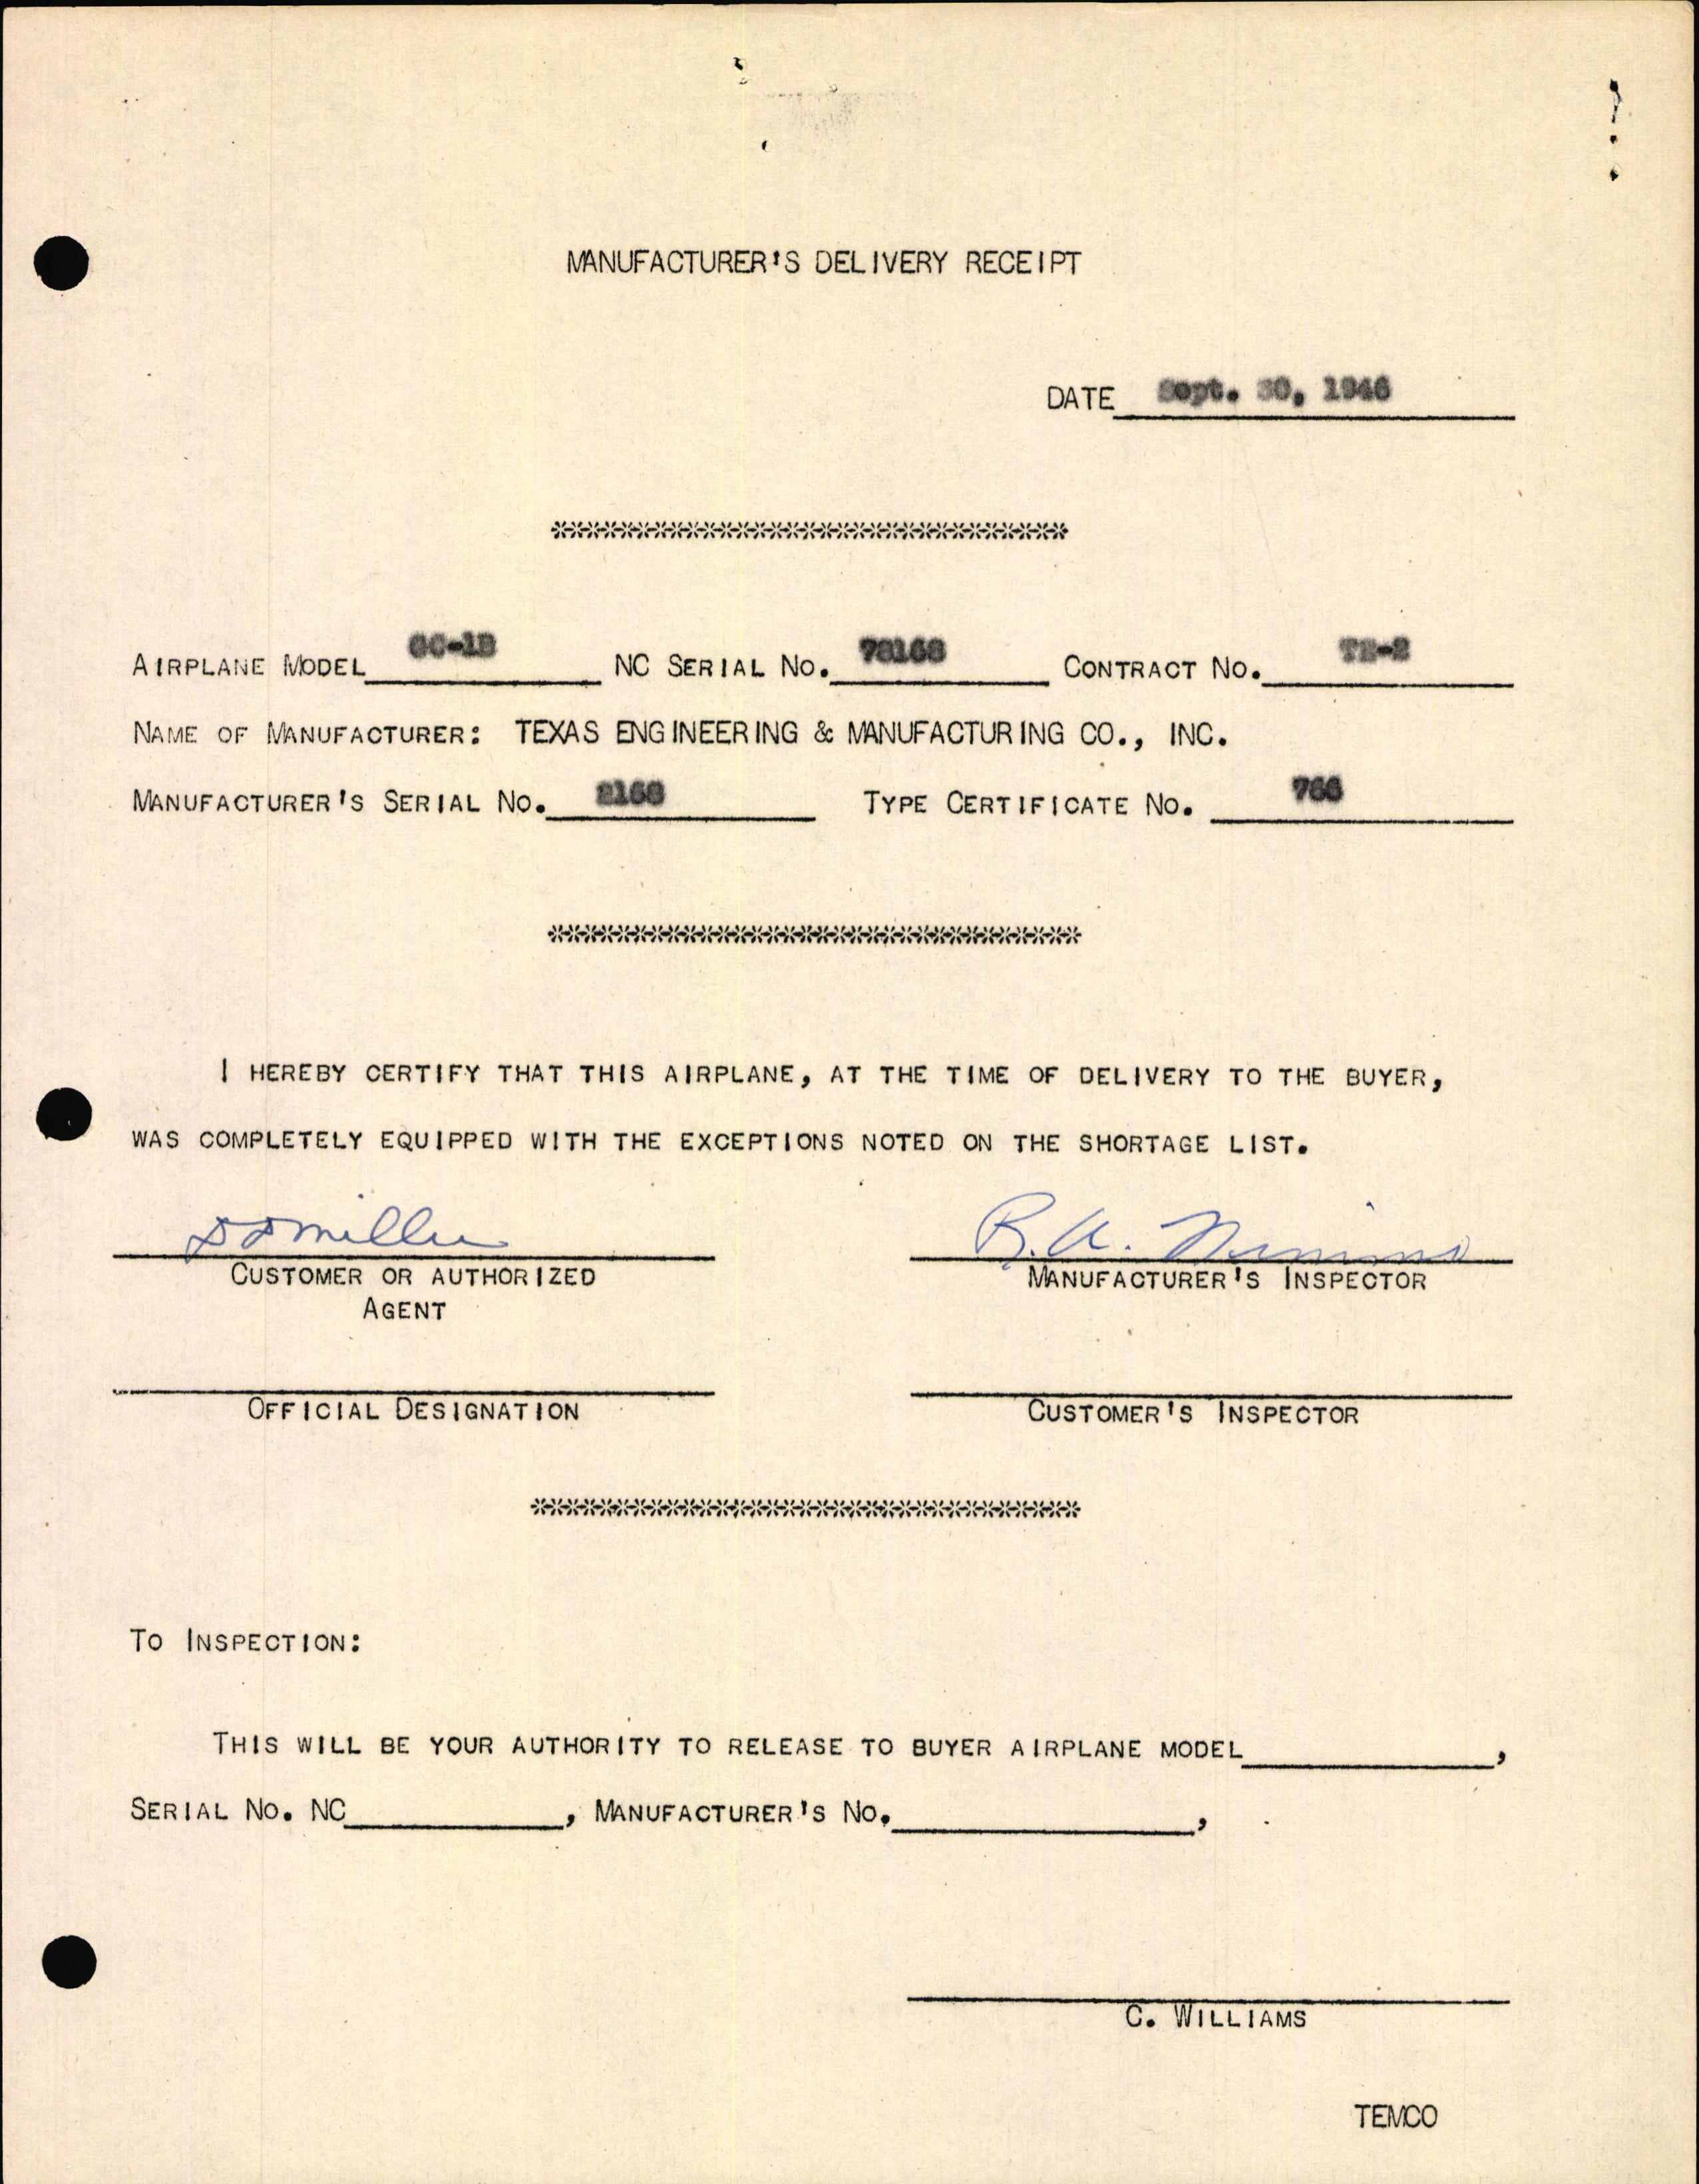 Sample page 3 from AirCorps Library document: Technical Information for Serial Number 2168